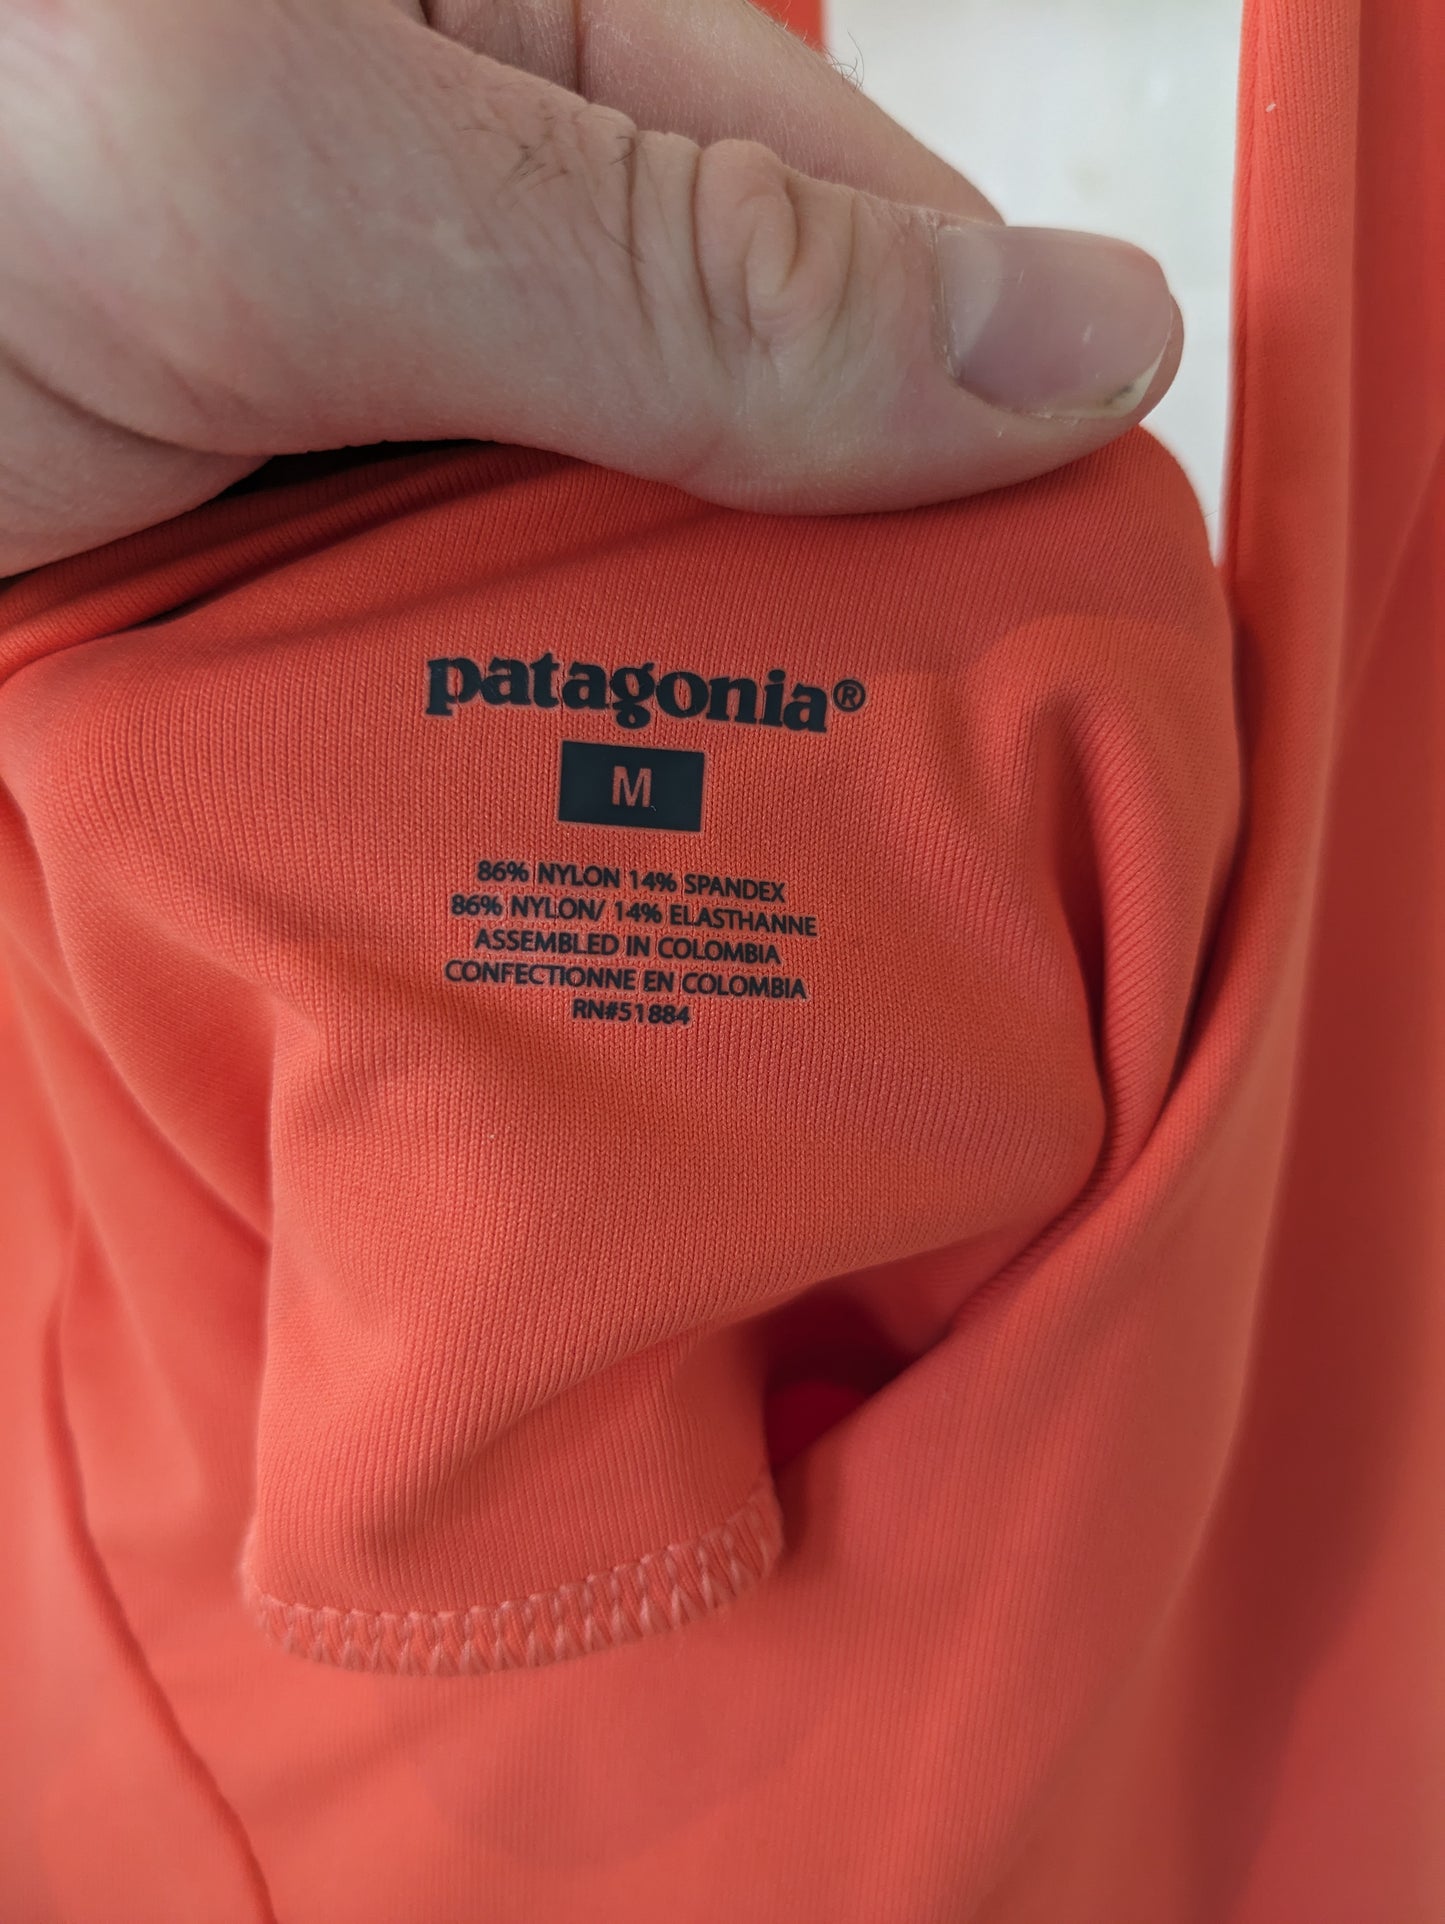 Athletic Dress By Patagonia  Size: M